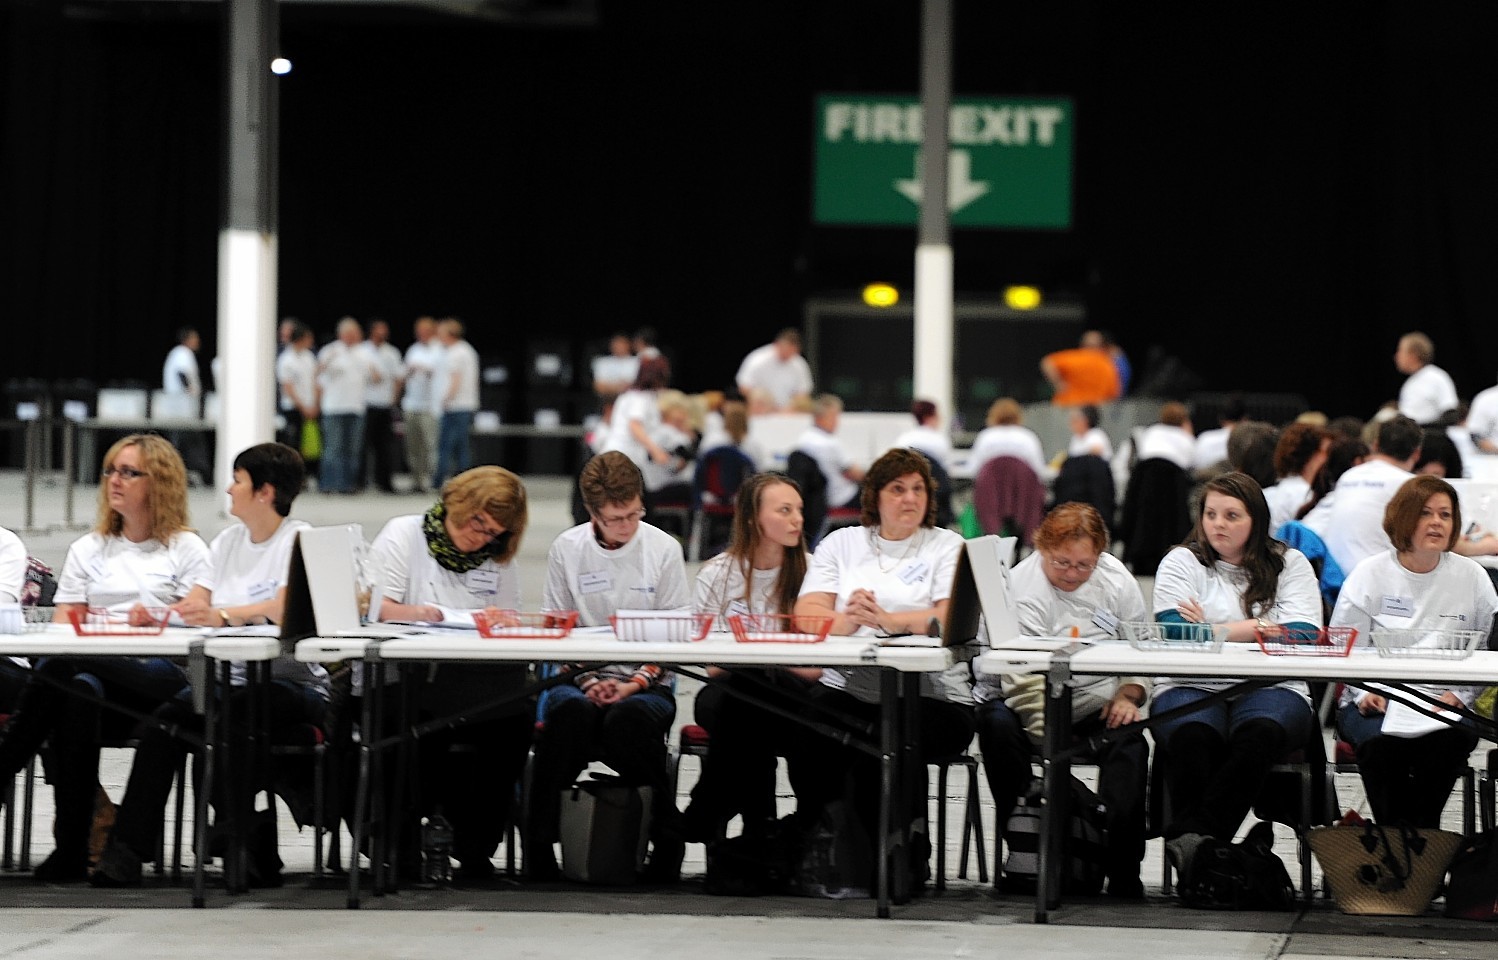 Counters have a long night ahead of them at the AECC with Aberdeen results expected at 6am